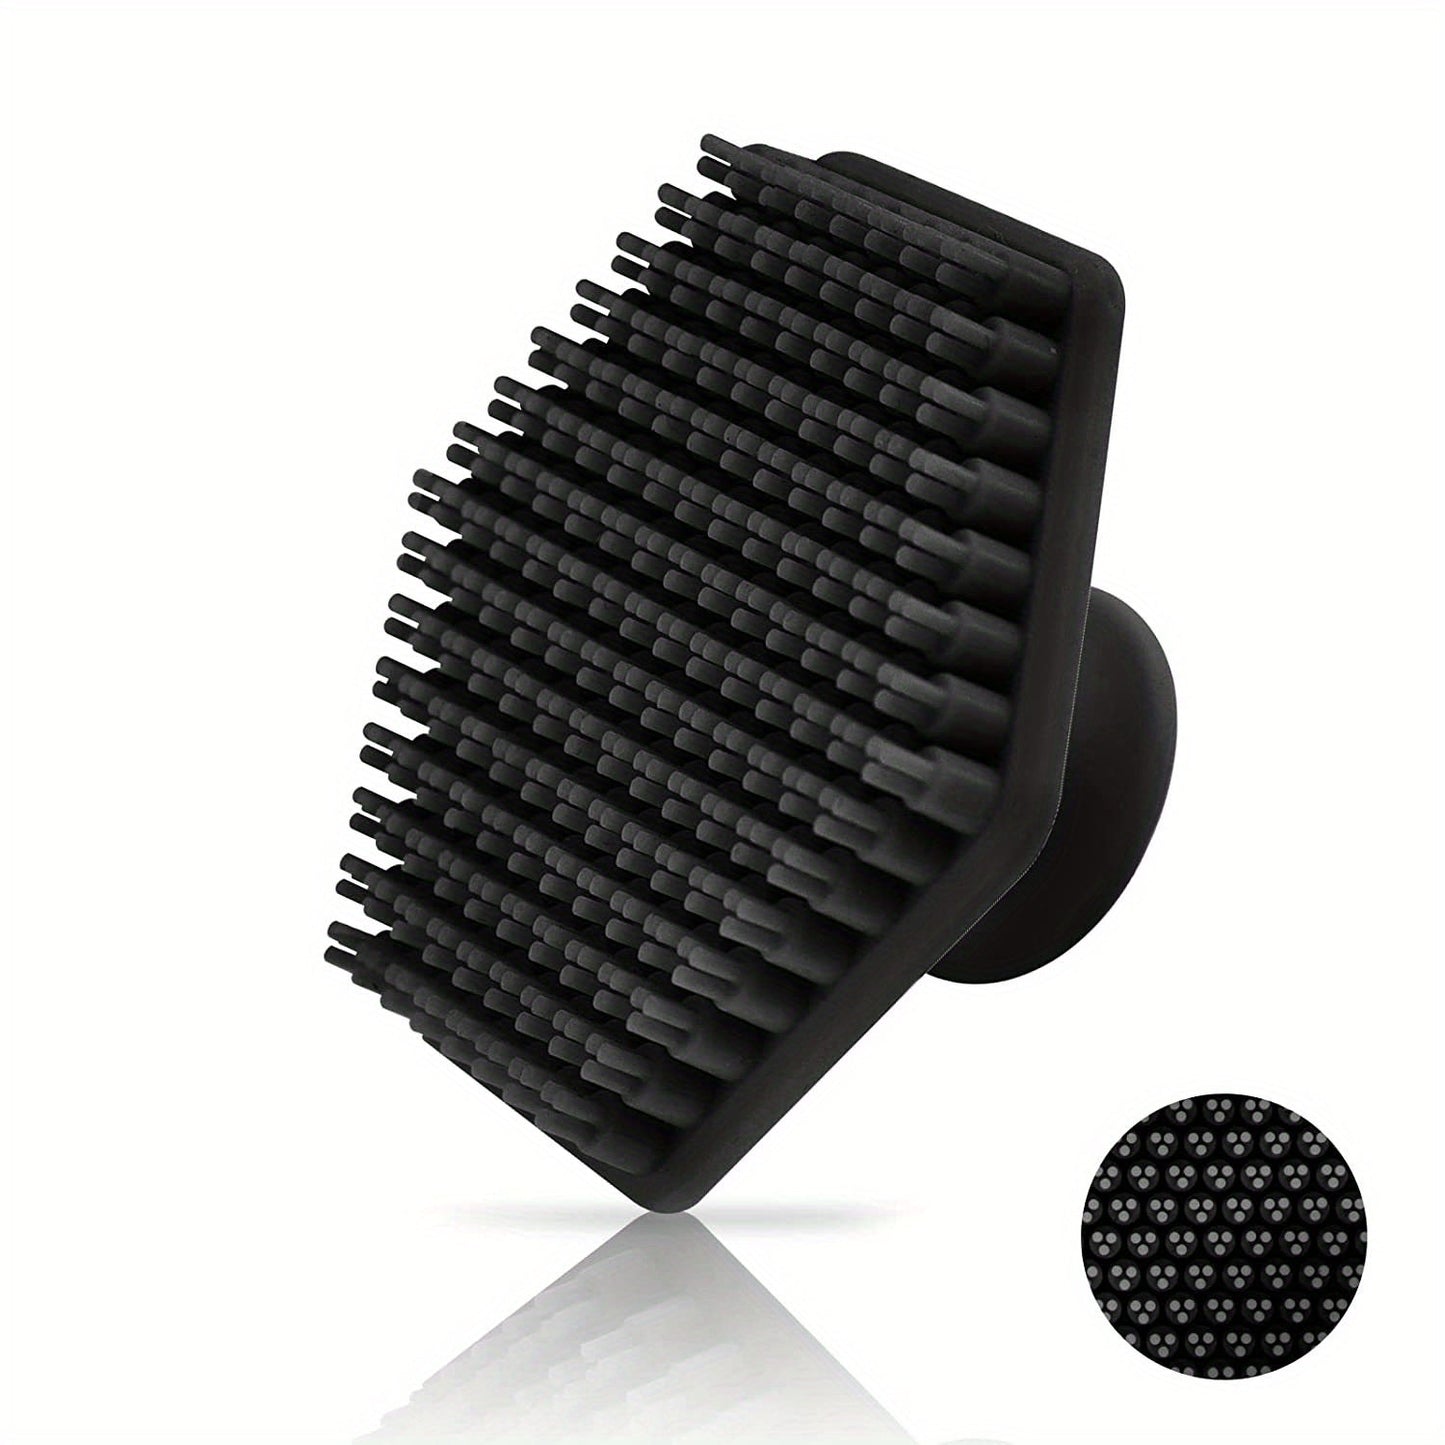 🔥Waterproof Facial Chamfer Cleaning Brush